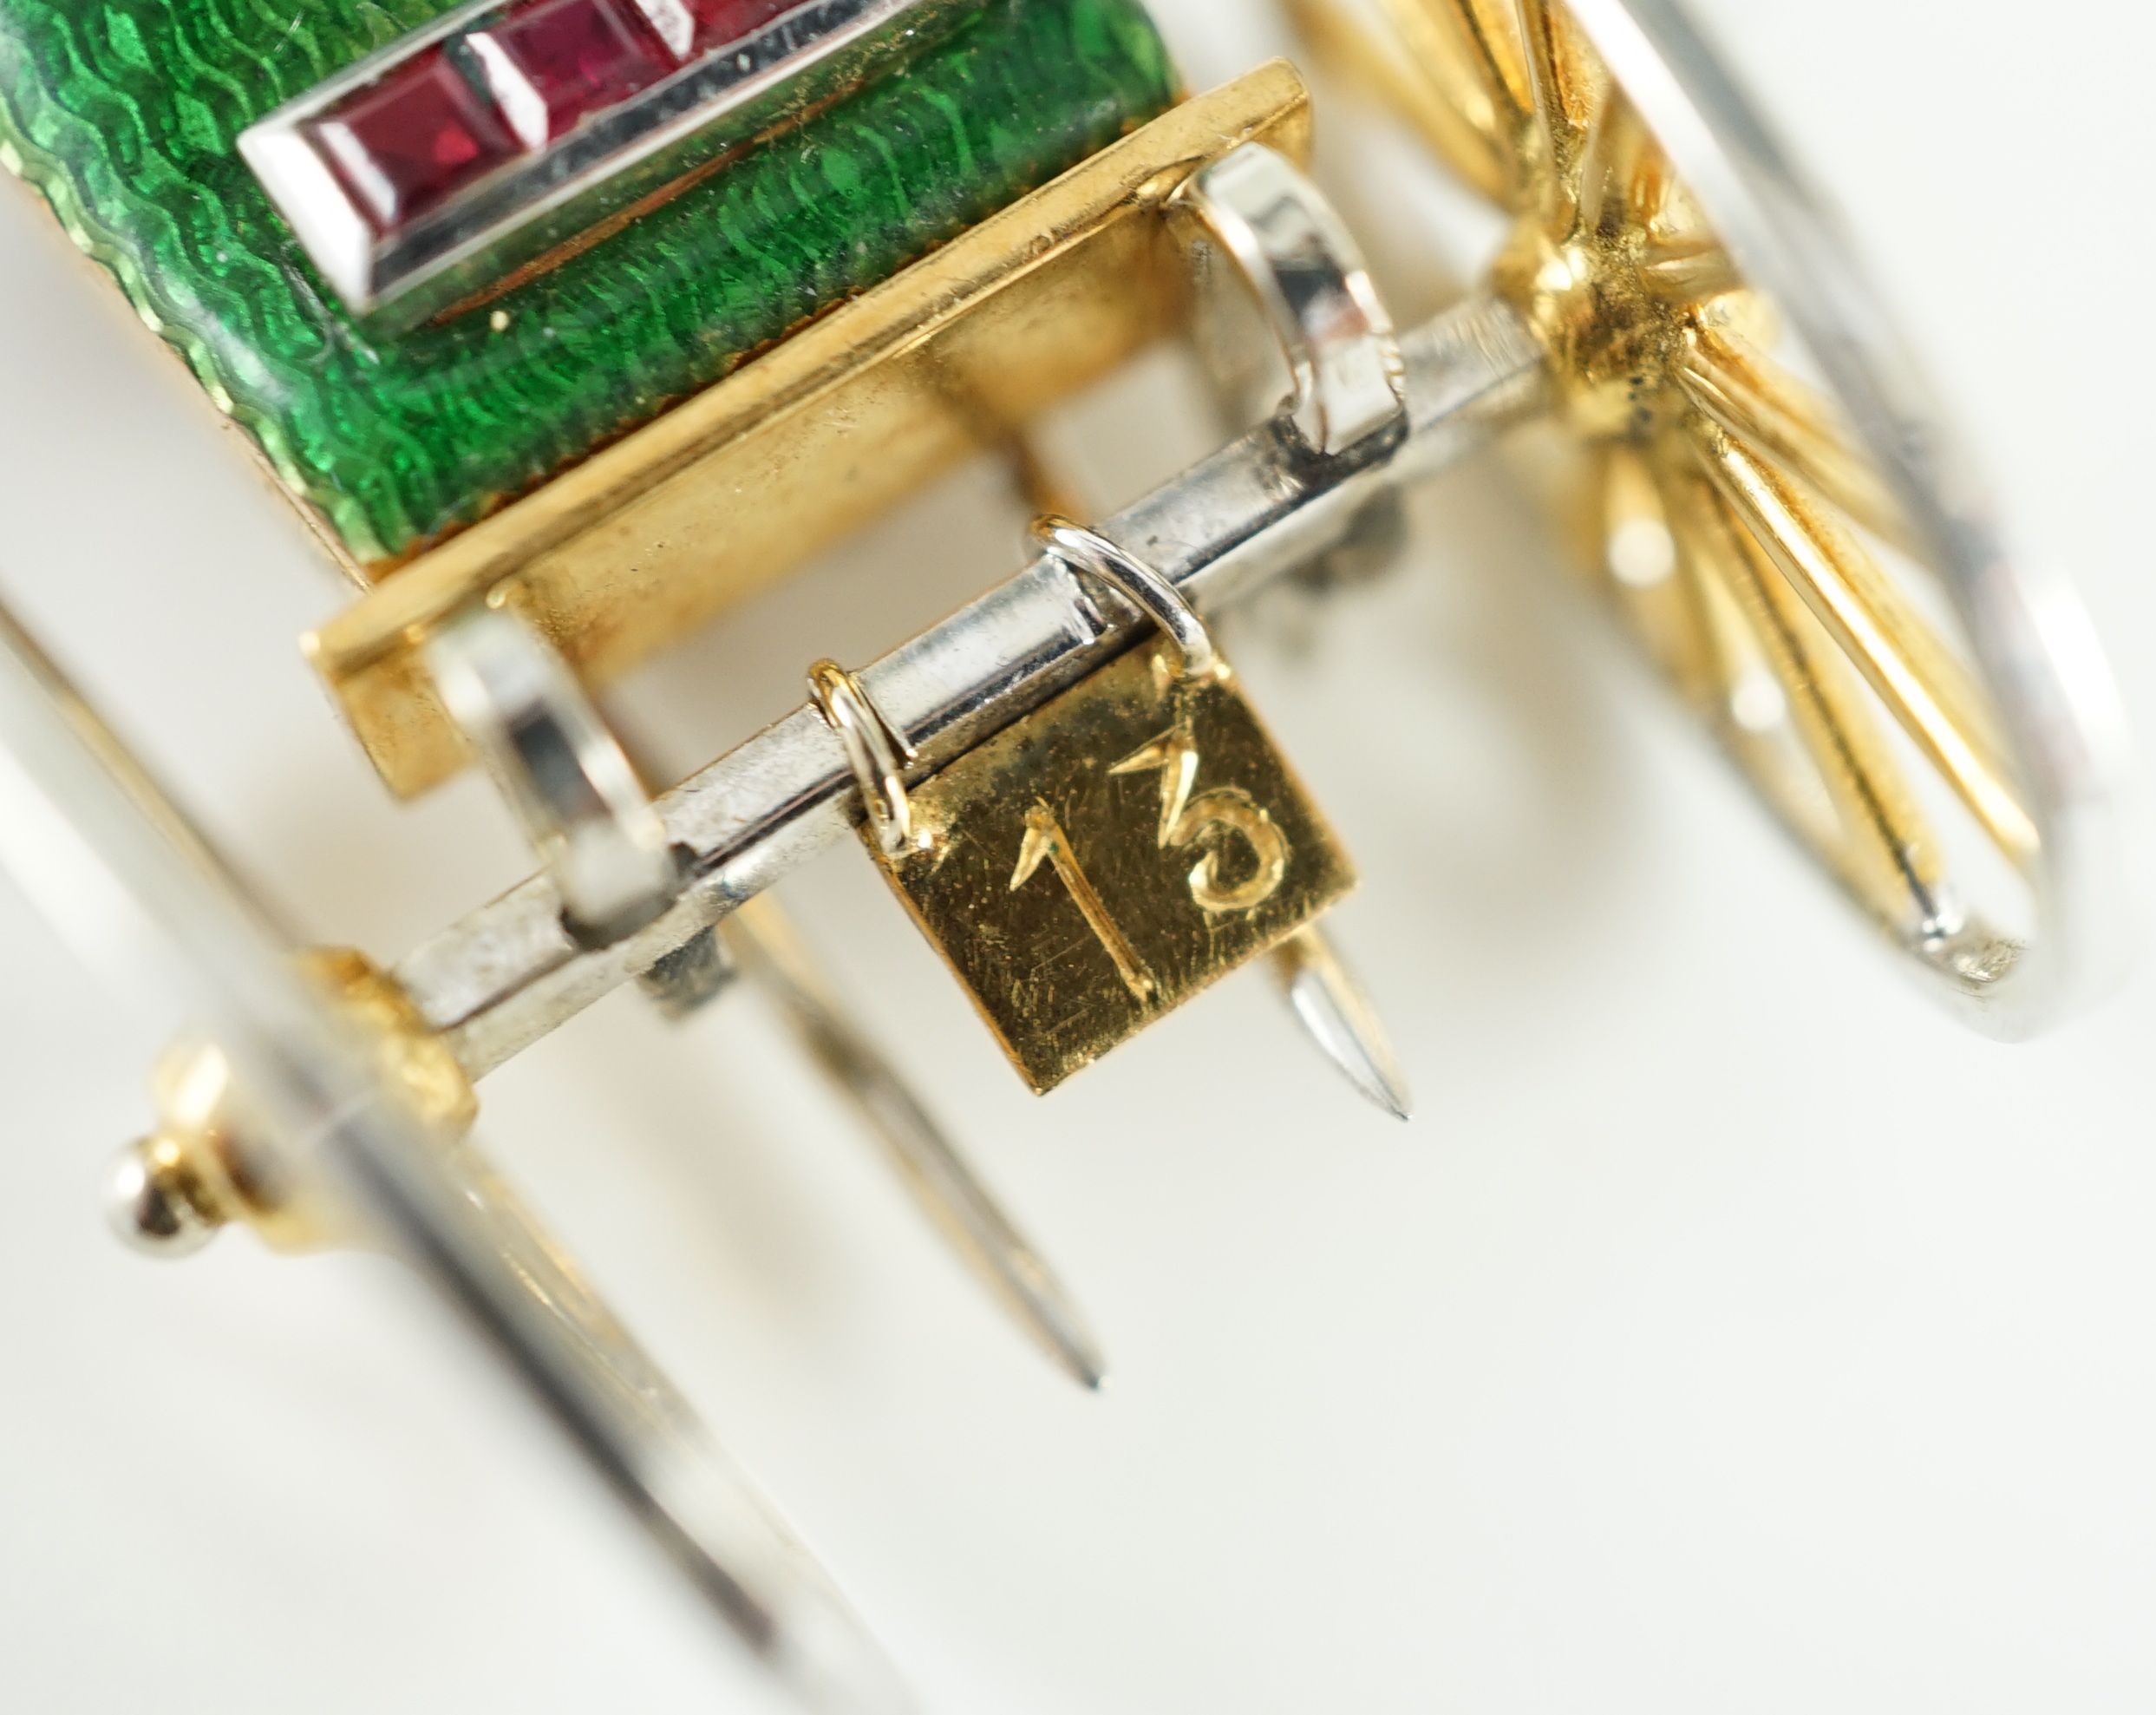 A mid 20th century Italian two colour 18ct gold, green enamel, ruby and diamond set novelty clip brooch, modelled as the rear view of a carriage with driver